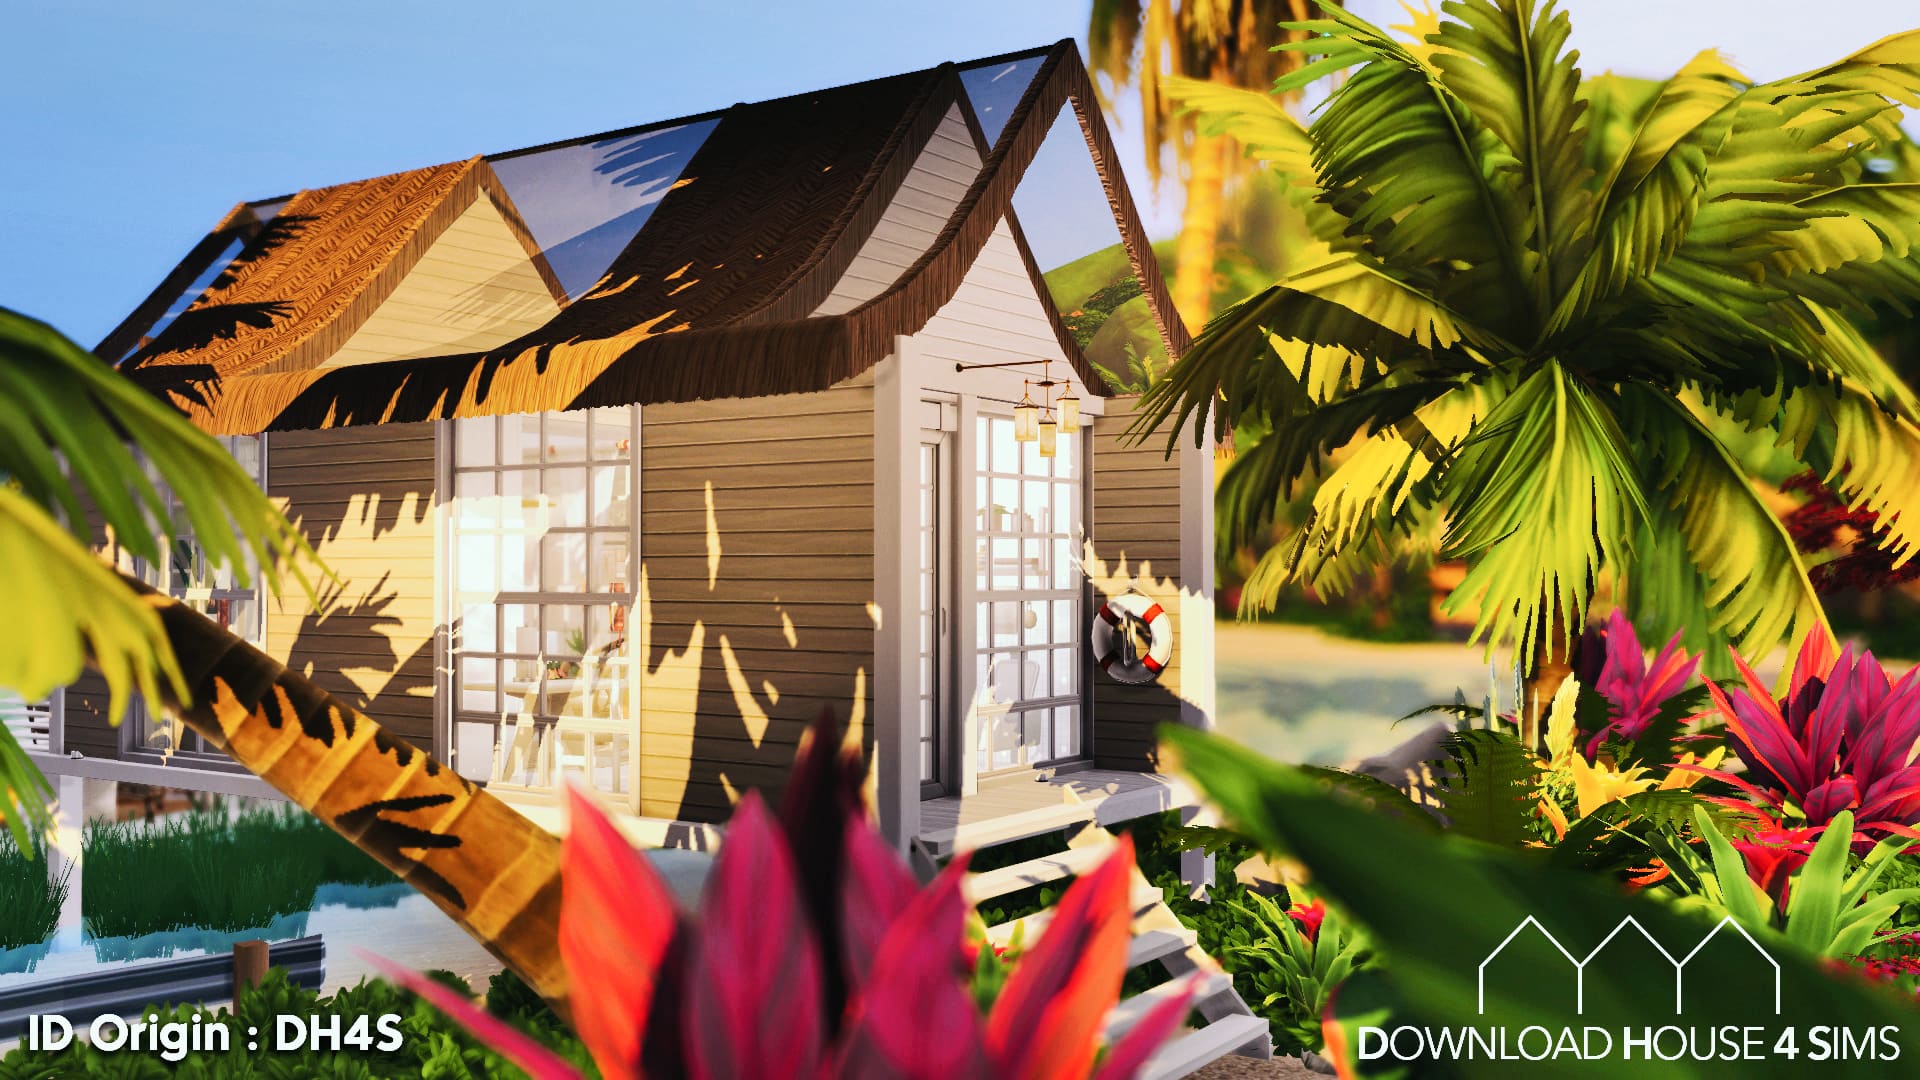 Download-House-4-sims-Tiny-beach-cabin-house-6